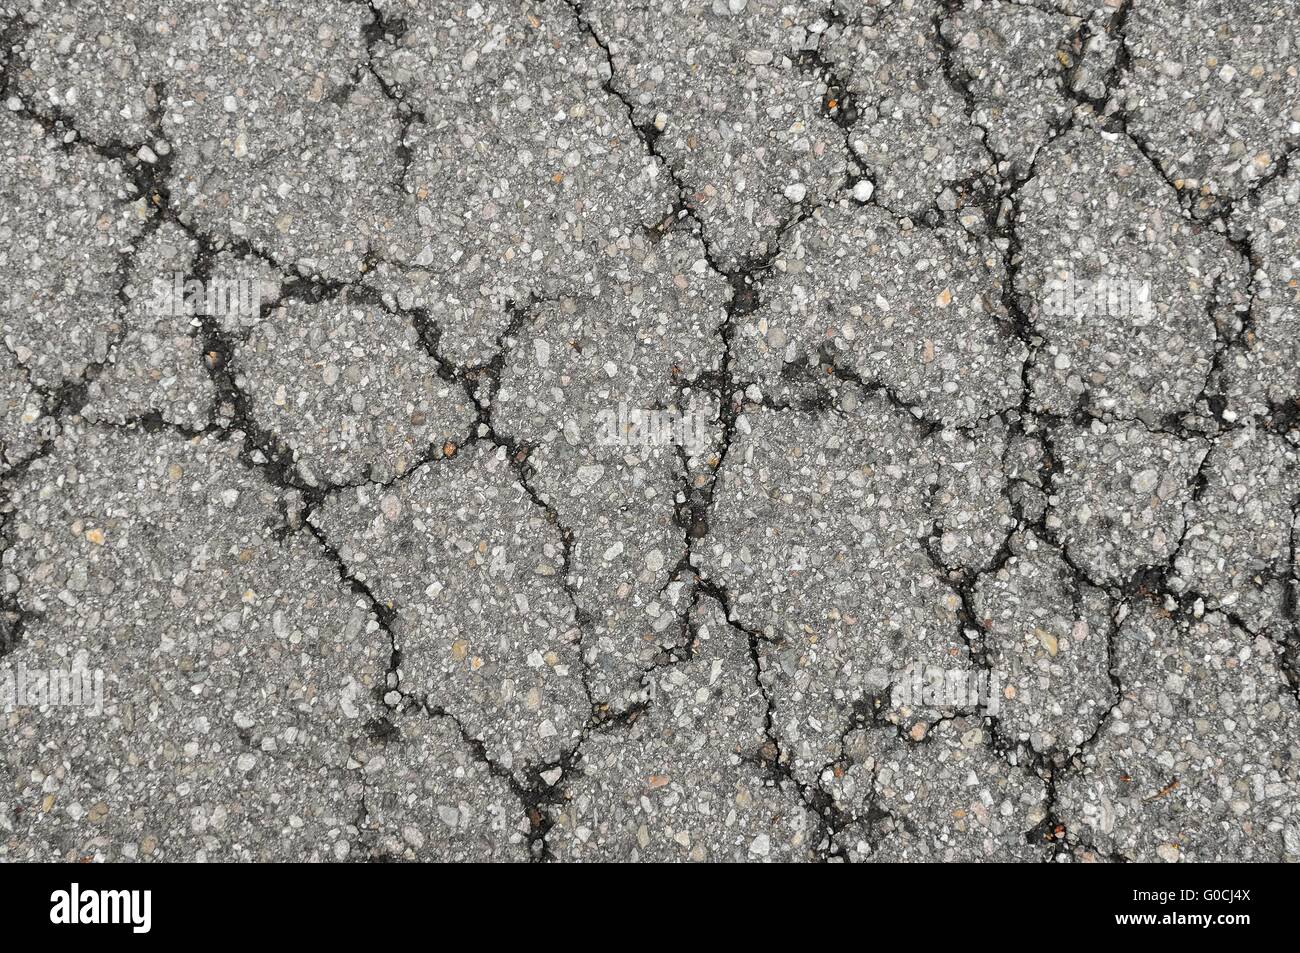 cracked road surface Stock Photo